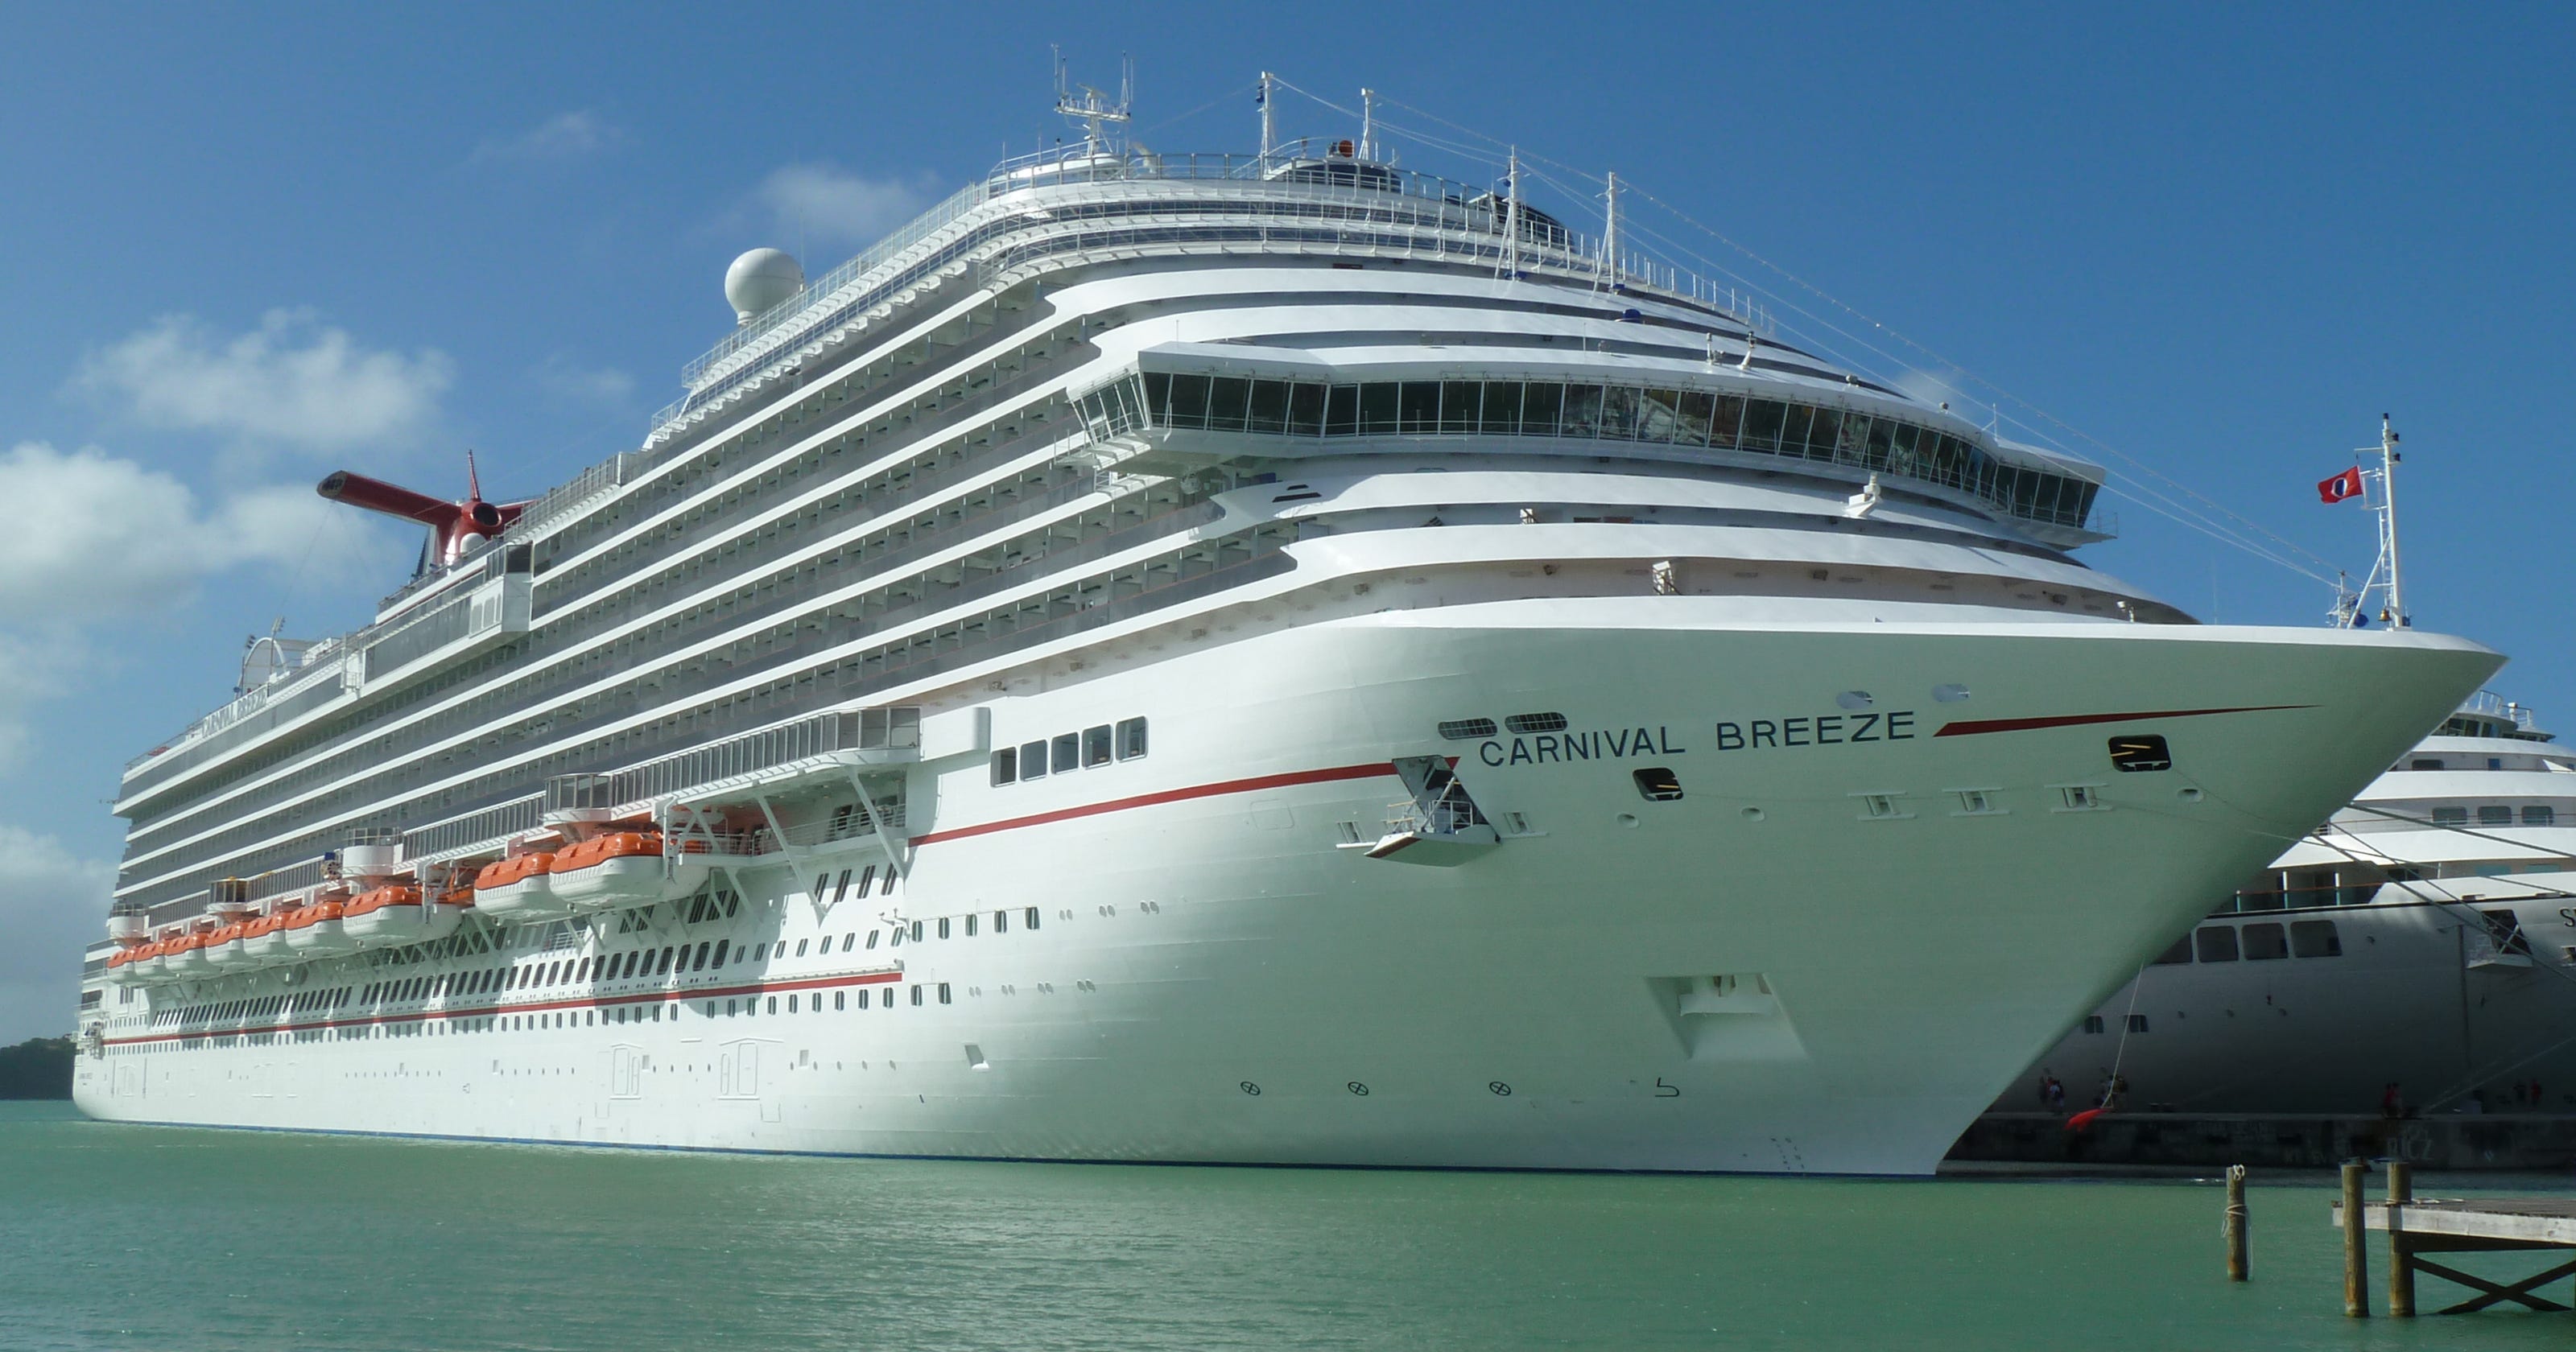 pictures of carnival breeze cruise ship